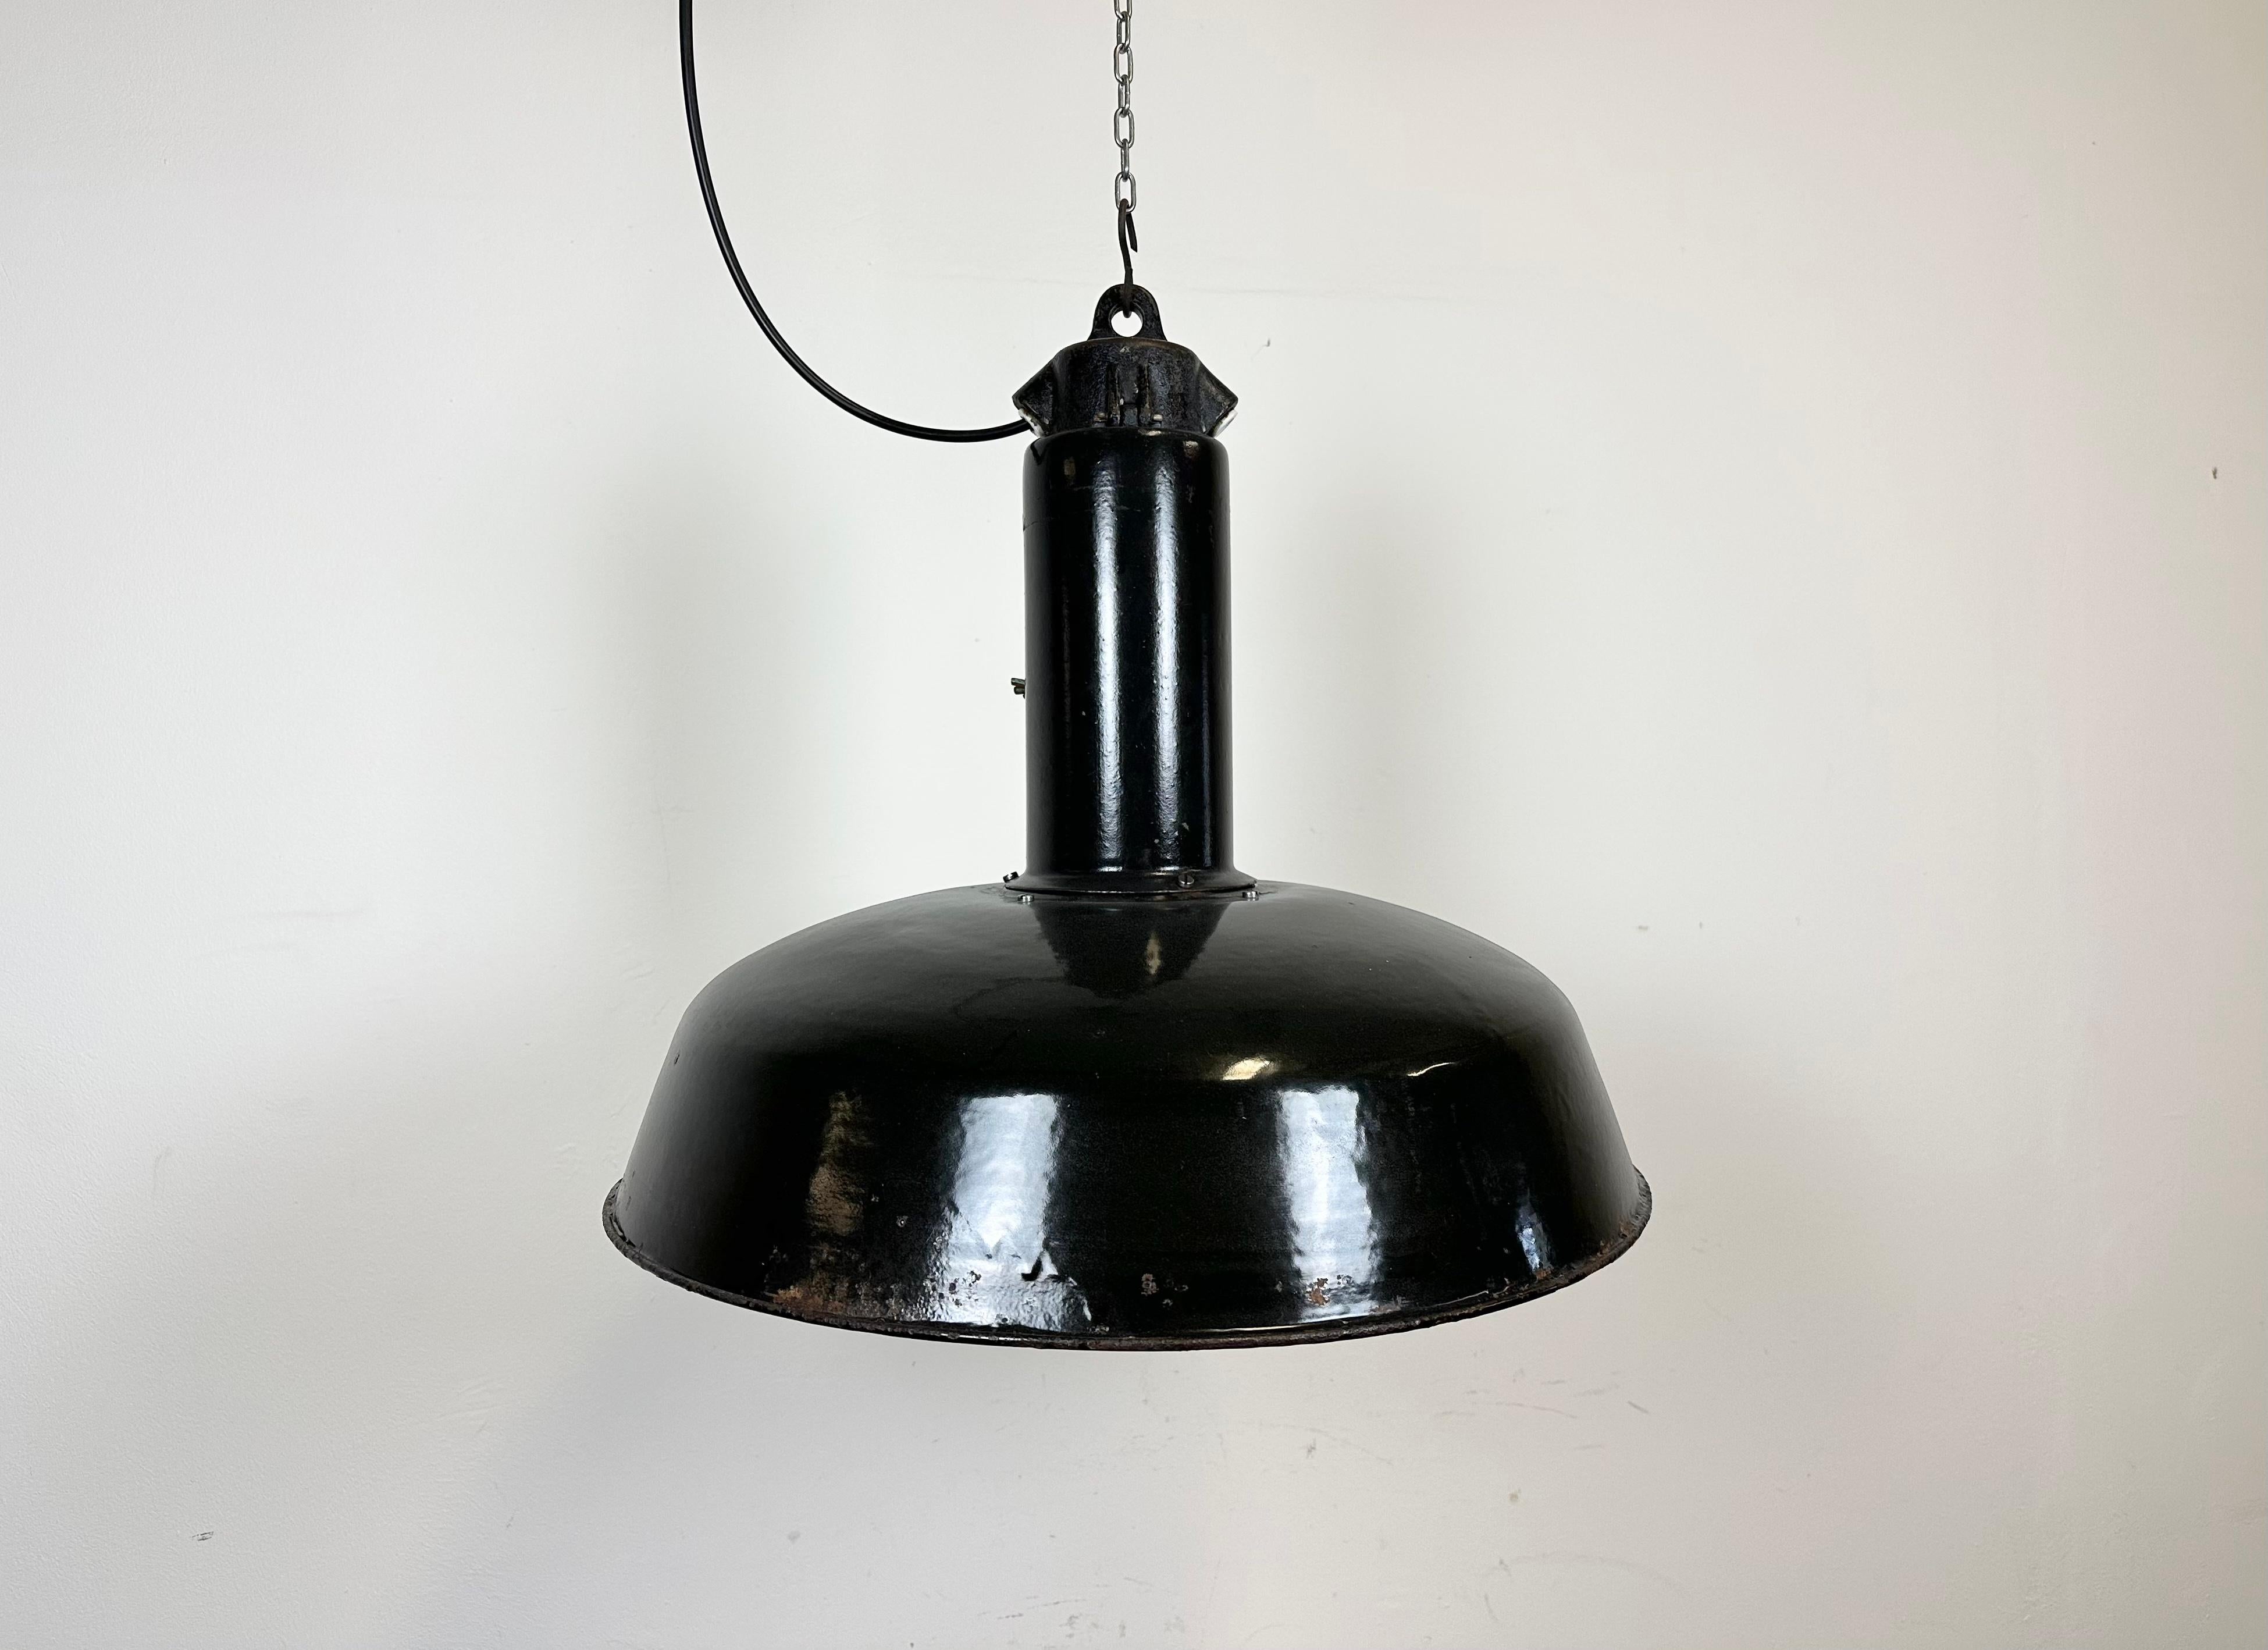 Industrial black enamel pendant light made in former Czechoslovakia during the 1960s. White enamel inside the shade. Cast iron top. The porcelain socket requires E 27/ E26 light bulbs. New wire. Fully functional. The weight of the lamp is 4 kg. Thge